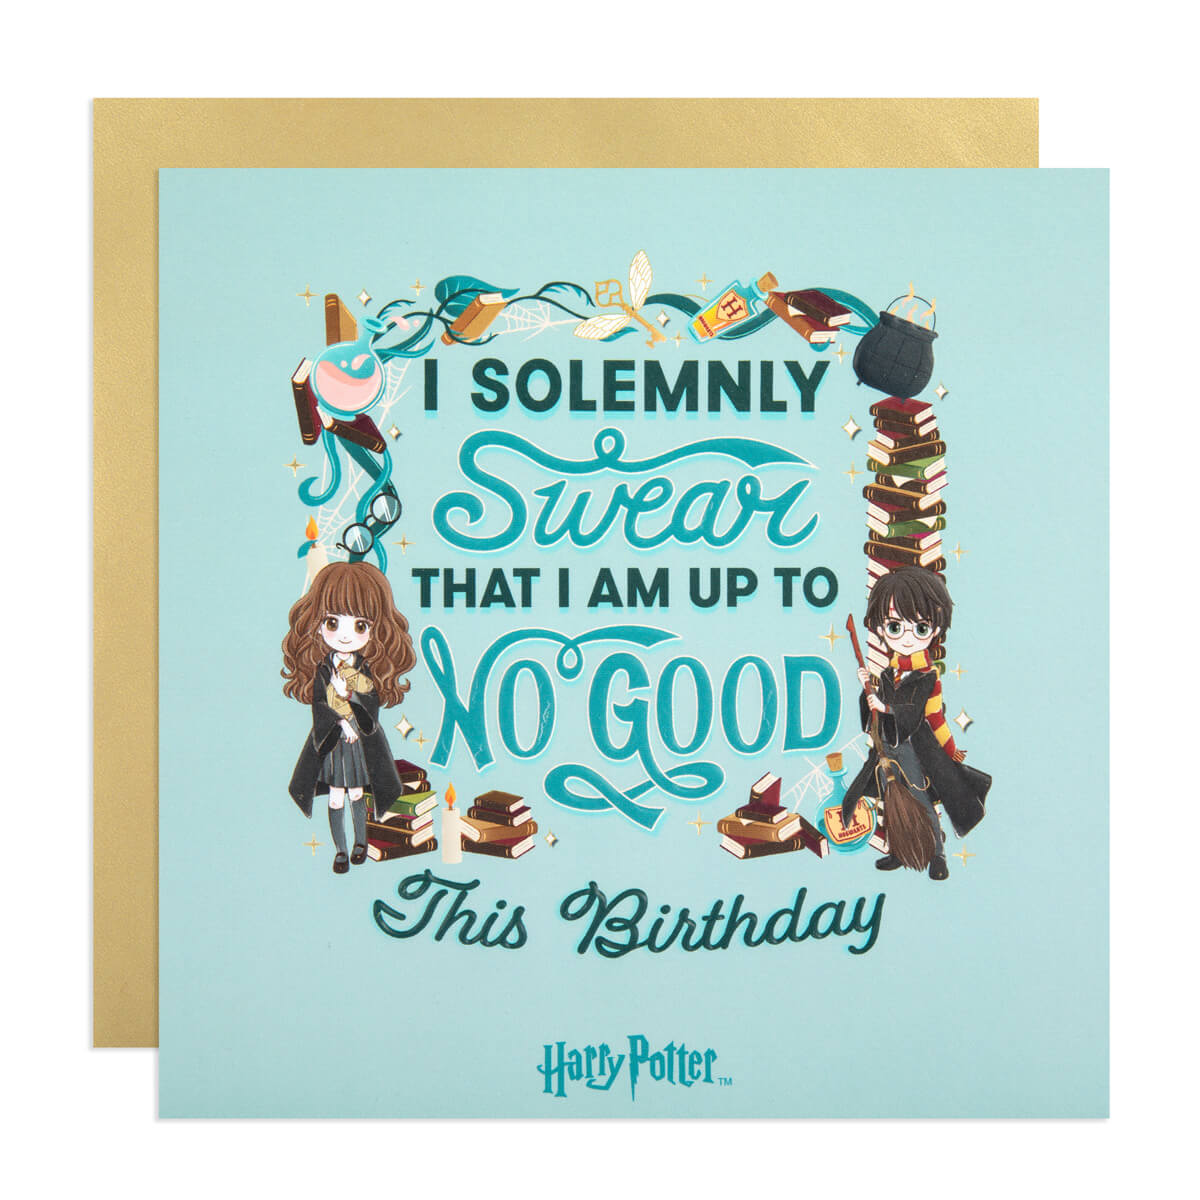 Harry Potter Anime Birthday Card - Wands At The Ready This Birthday! -  Cardology